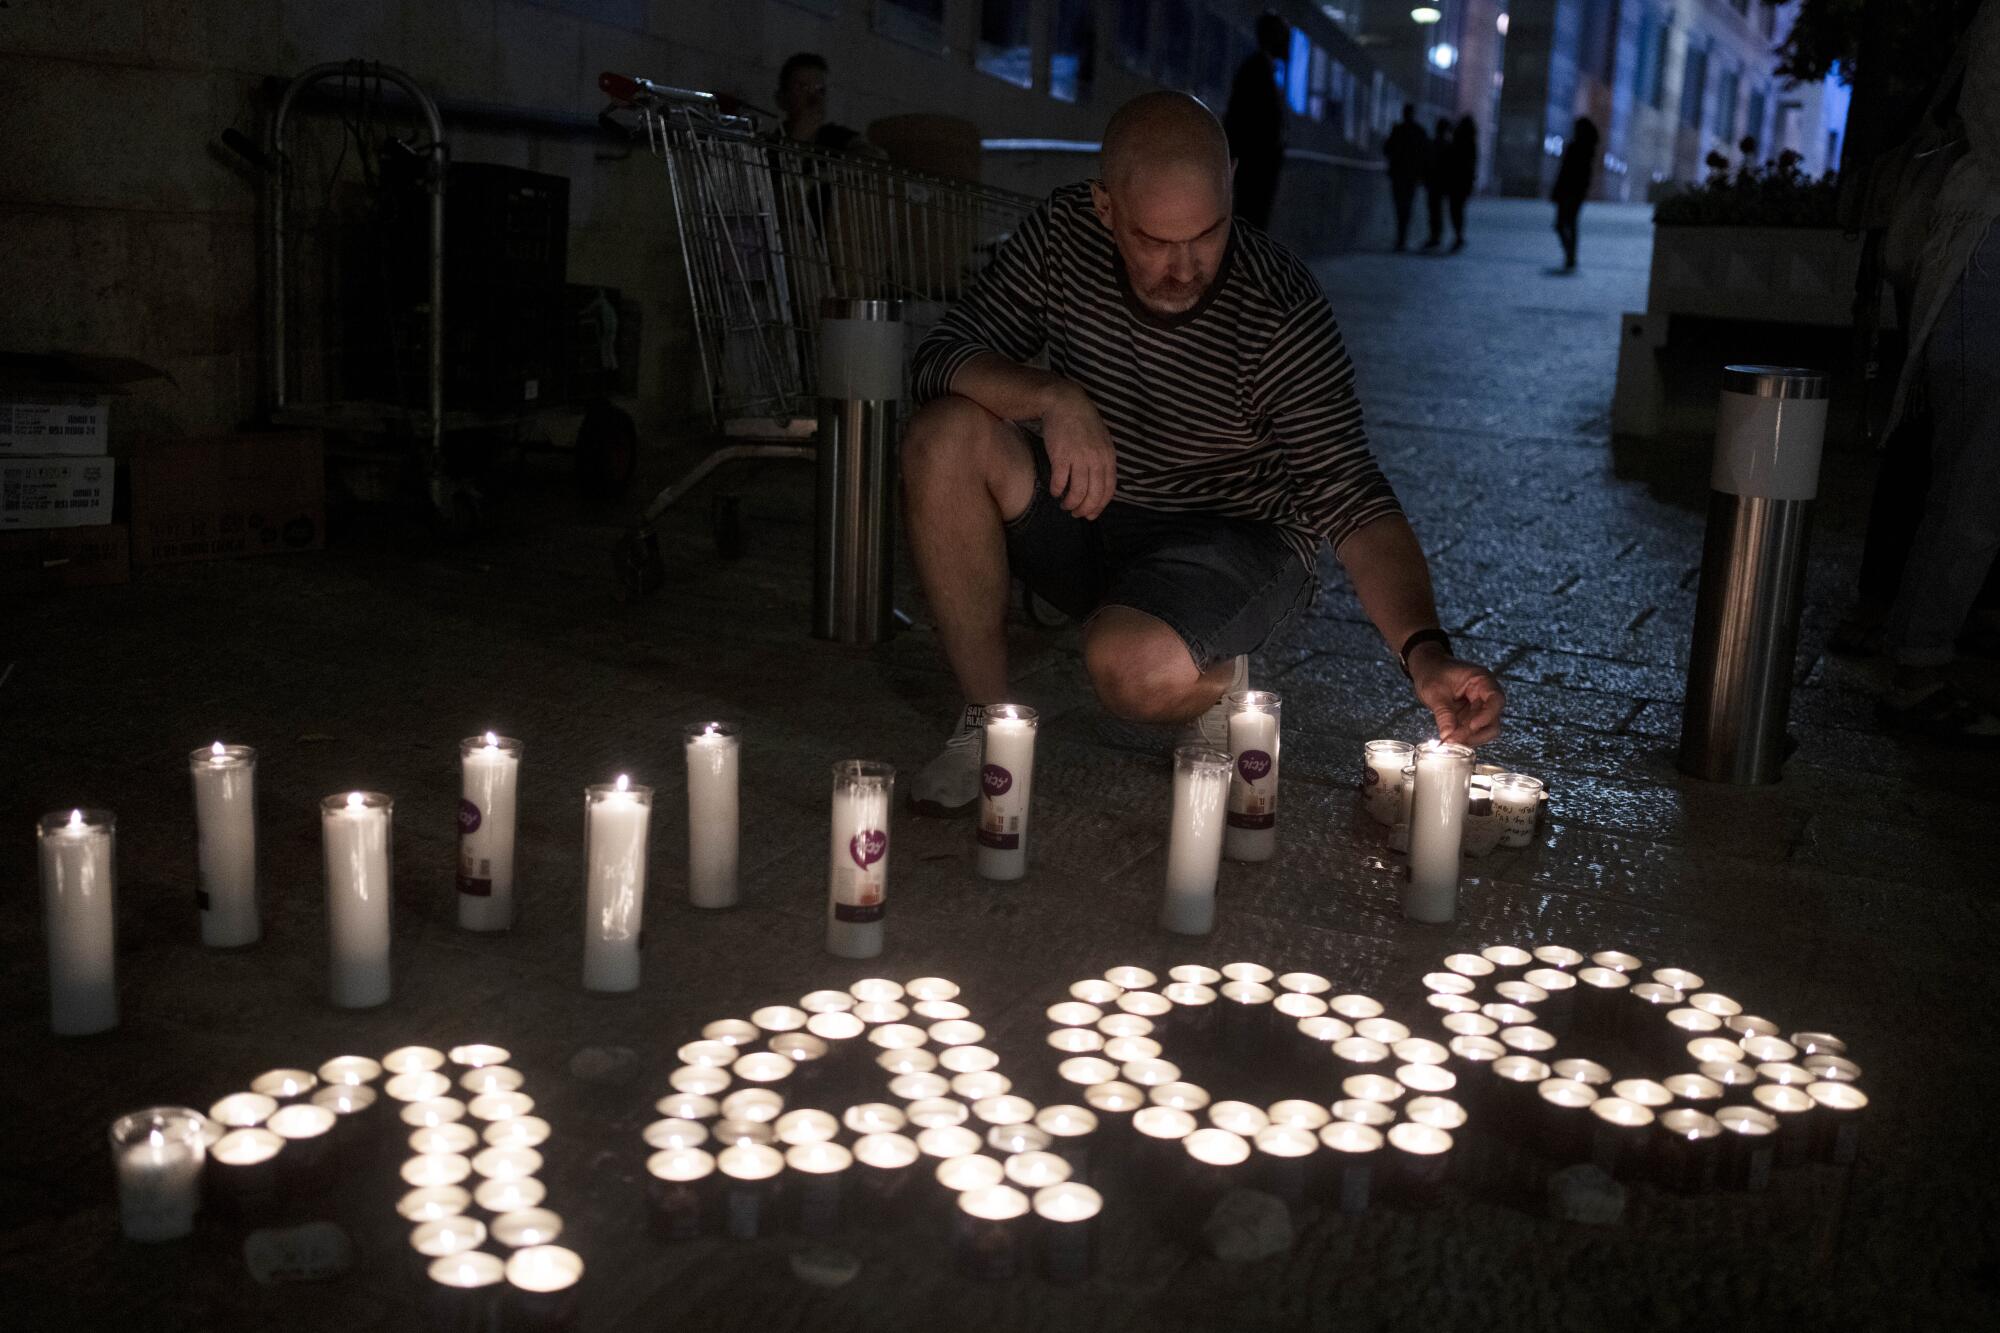 Man lighting candles, some grouped to form the number 1,400 